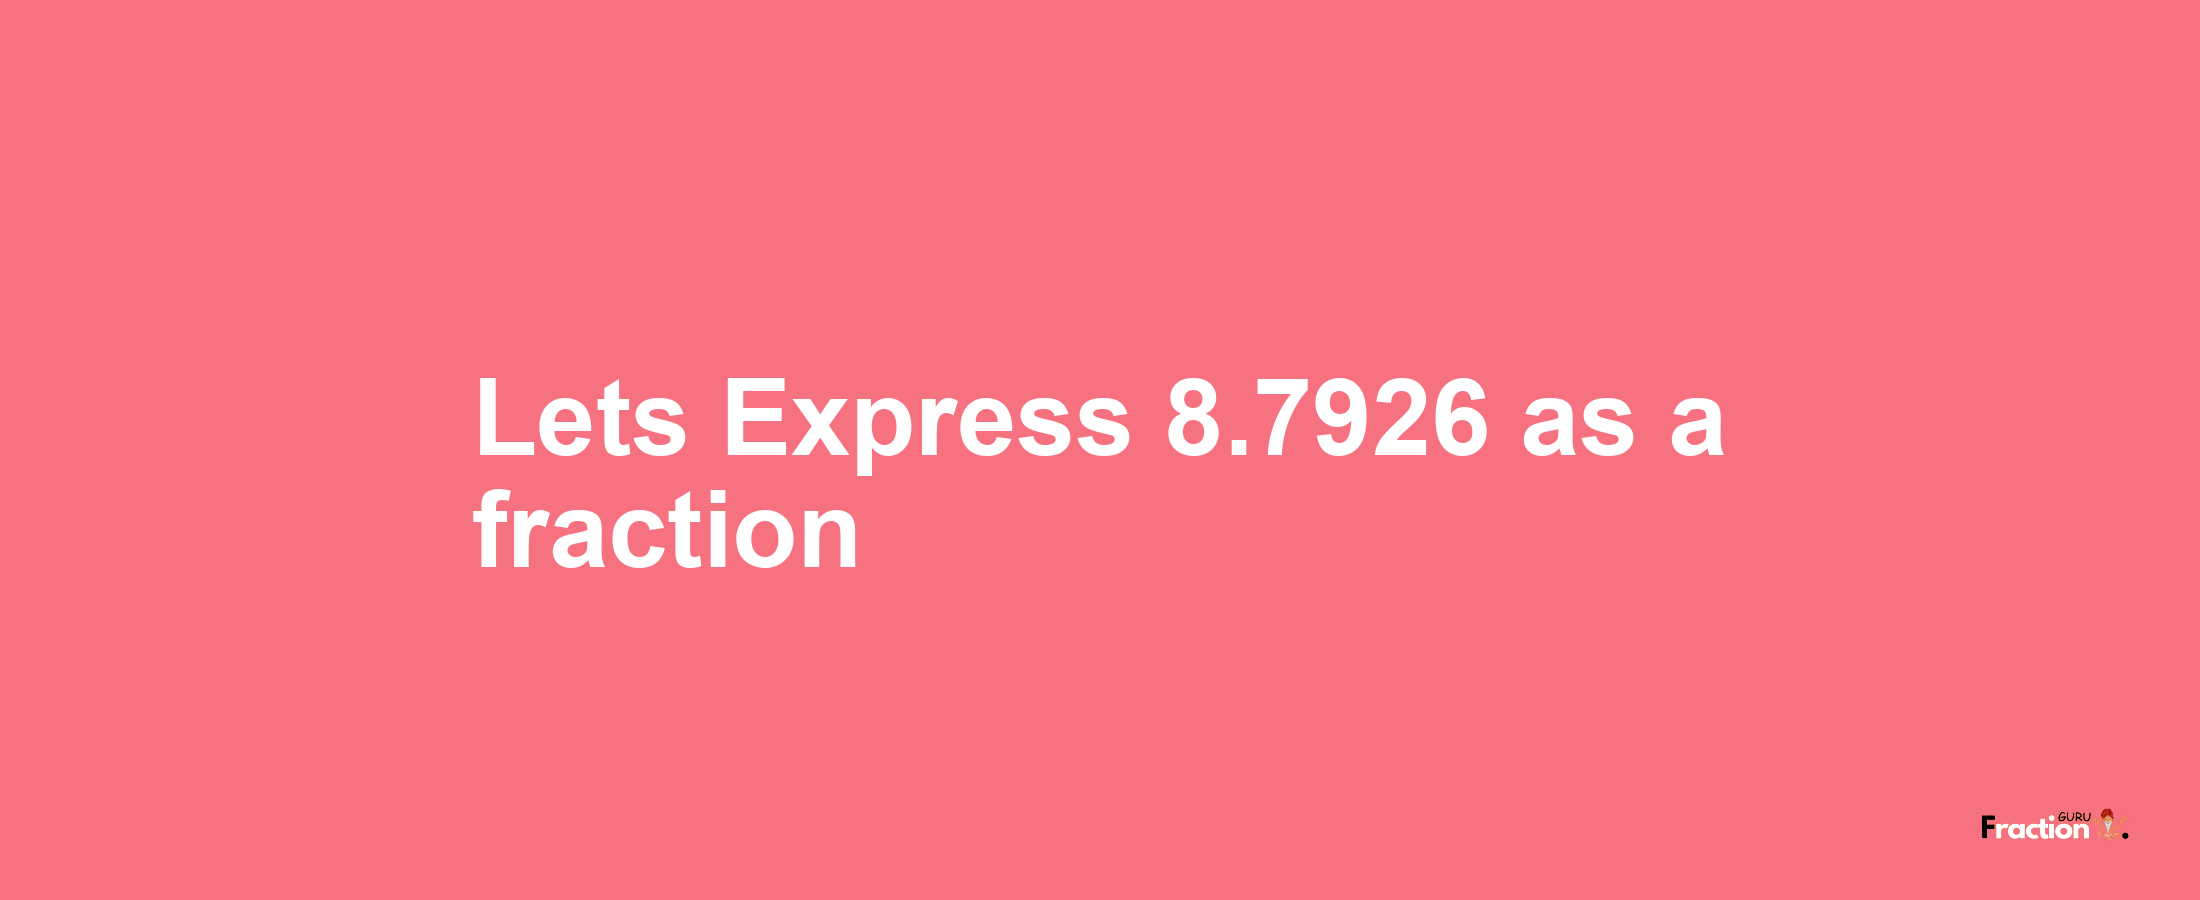 Lets Express 8.7926 as afraction